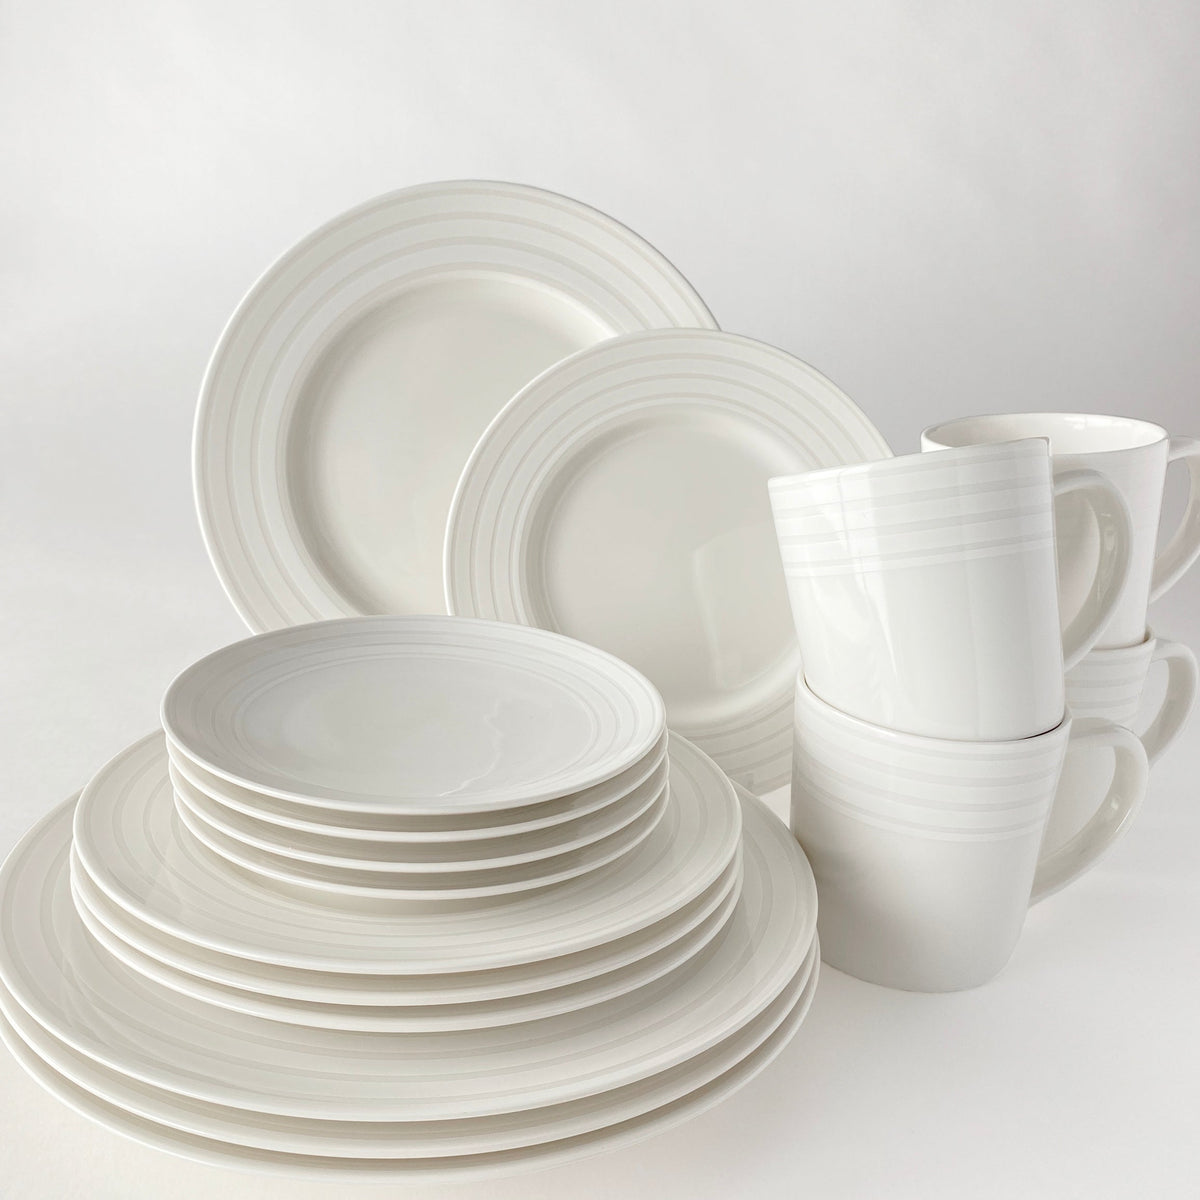 A neatly stacked set of white ceramic dinnerware, including the Caskata Artisanal Home Cambridge Stripe Rimmed Dinner Plate and mugs adorned with the Cambridge Stripe pattern, all arranged on a white surface. This timeless dinnerware brings elegance to any dining setting.